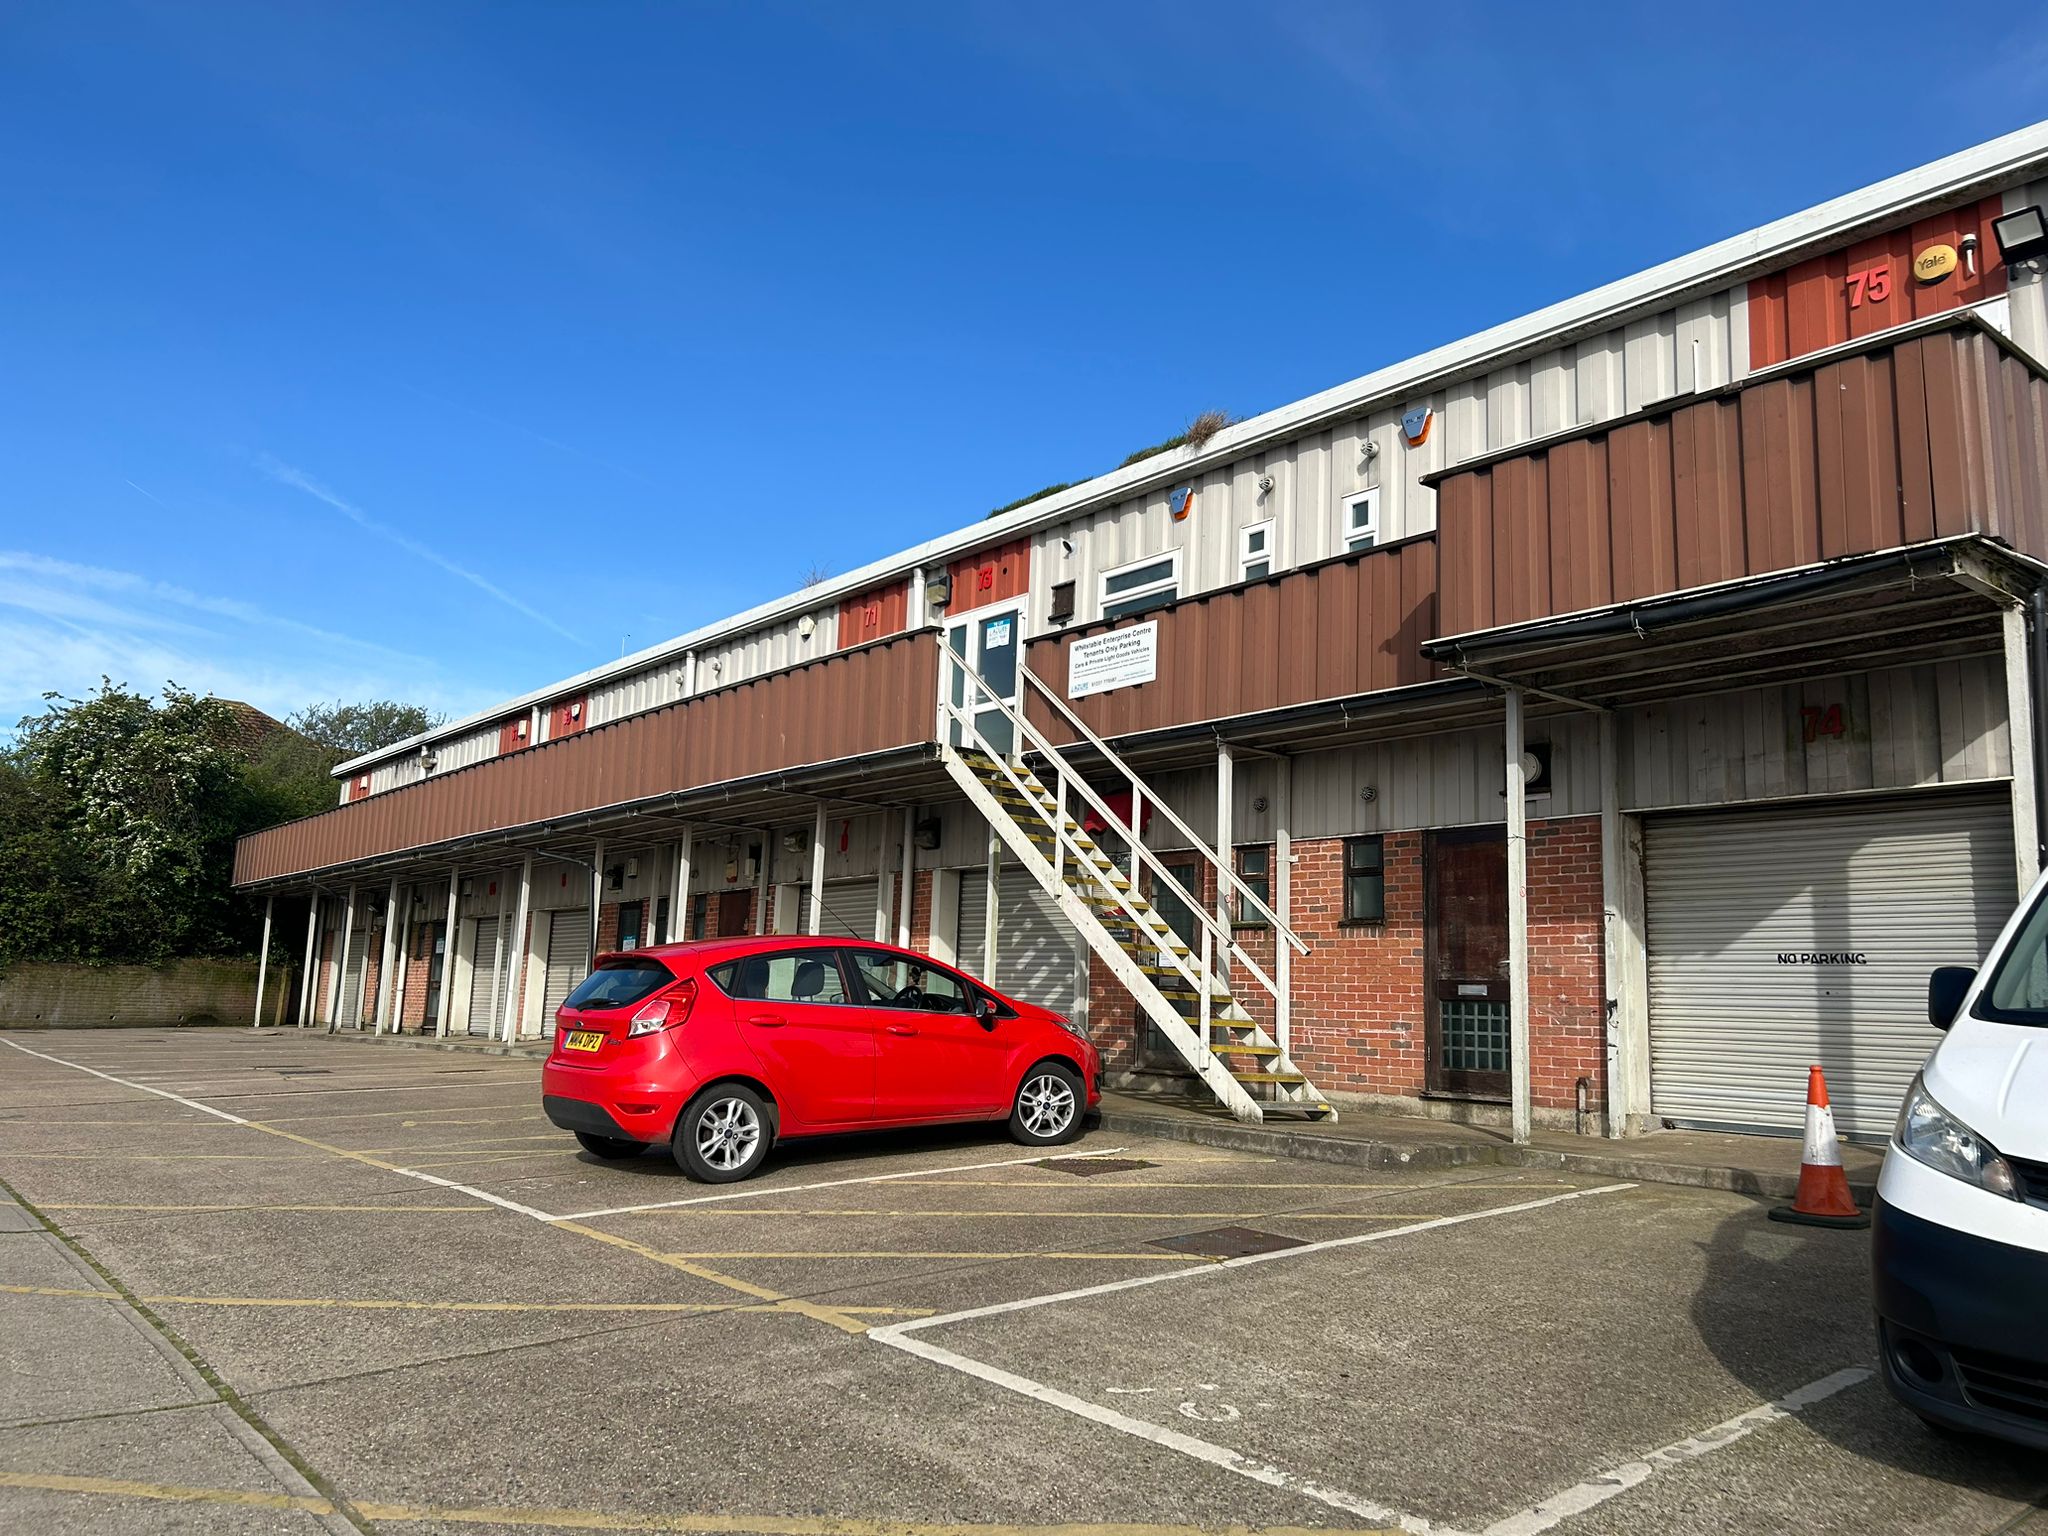 0 bed Light Industrial for rent in Whitstable. From Azure Property Consultants